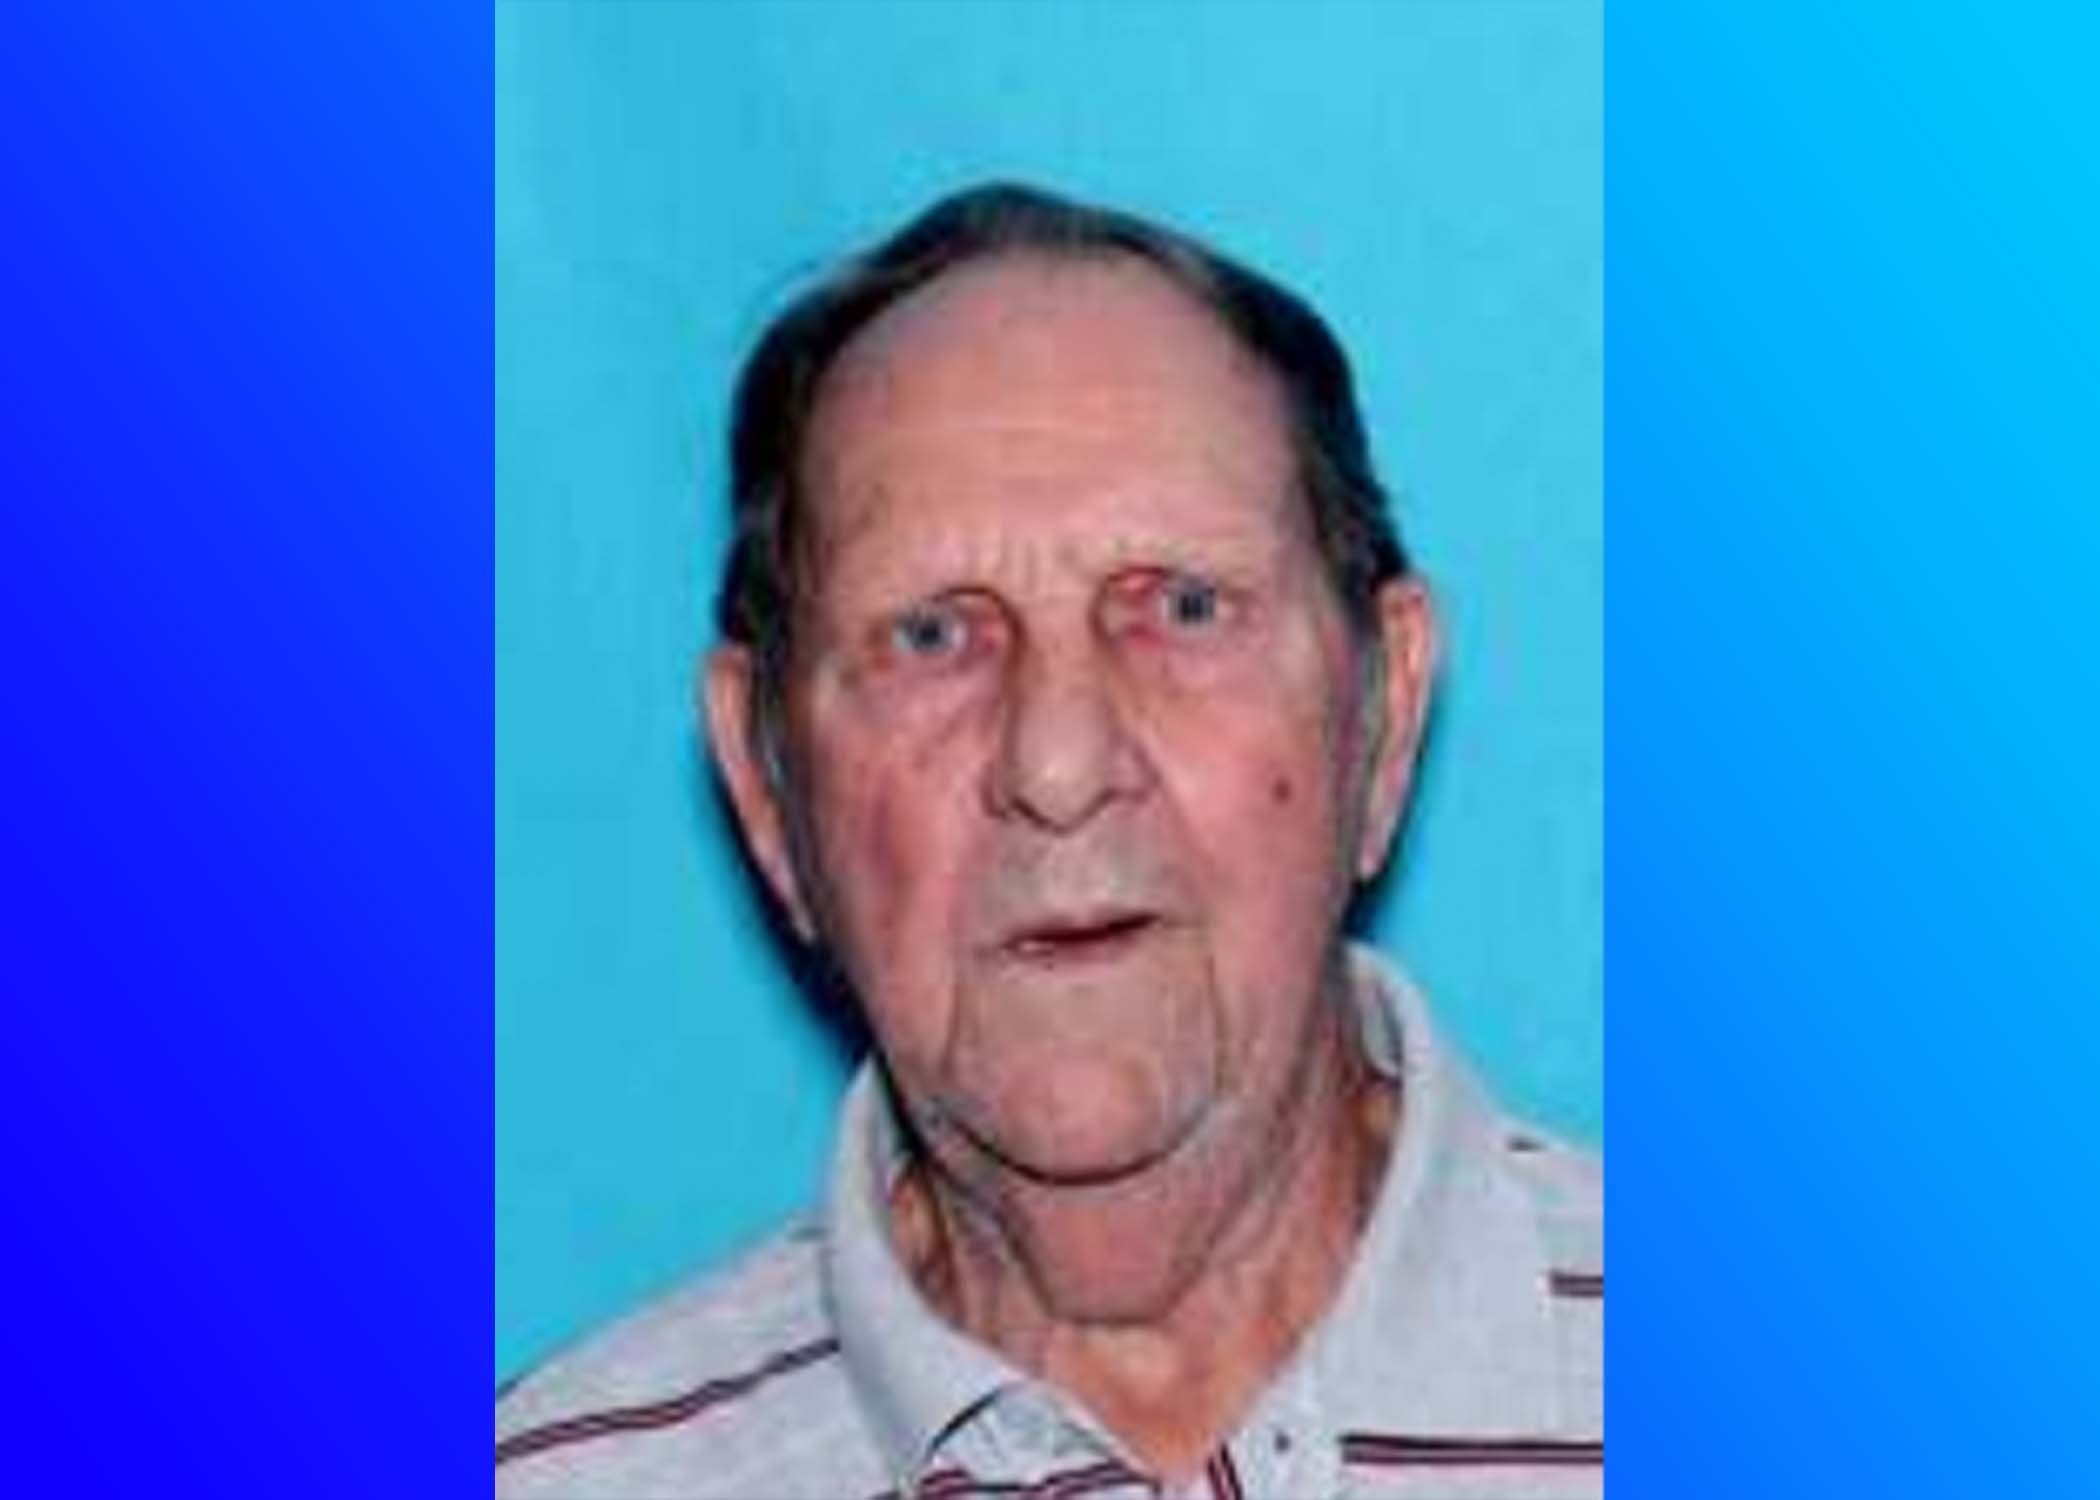 Missing and endangered person alert issued for Dothan man